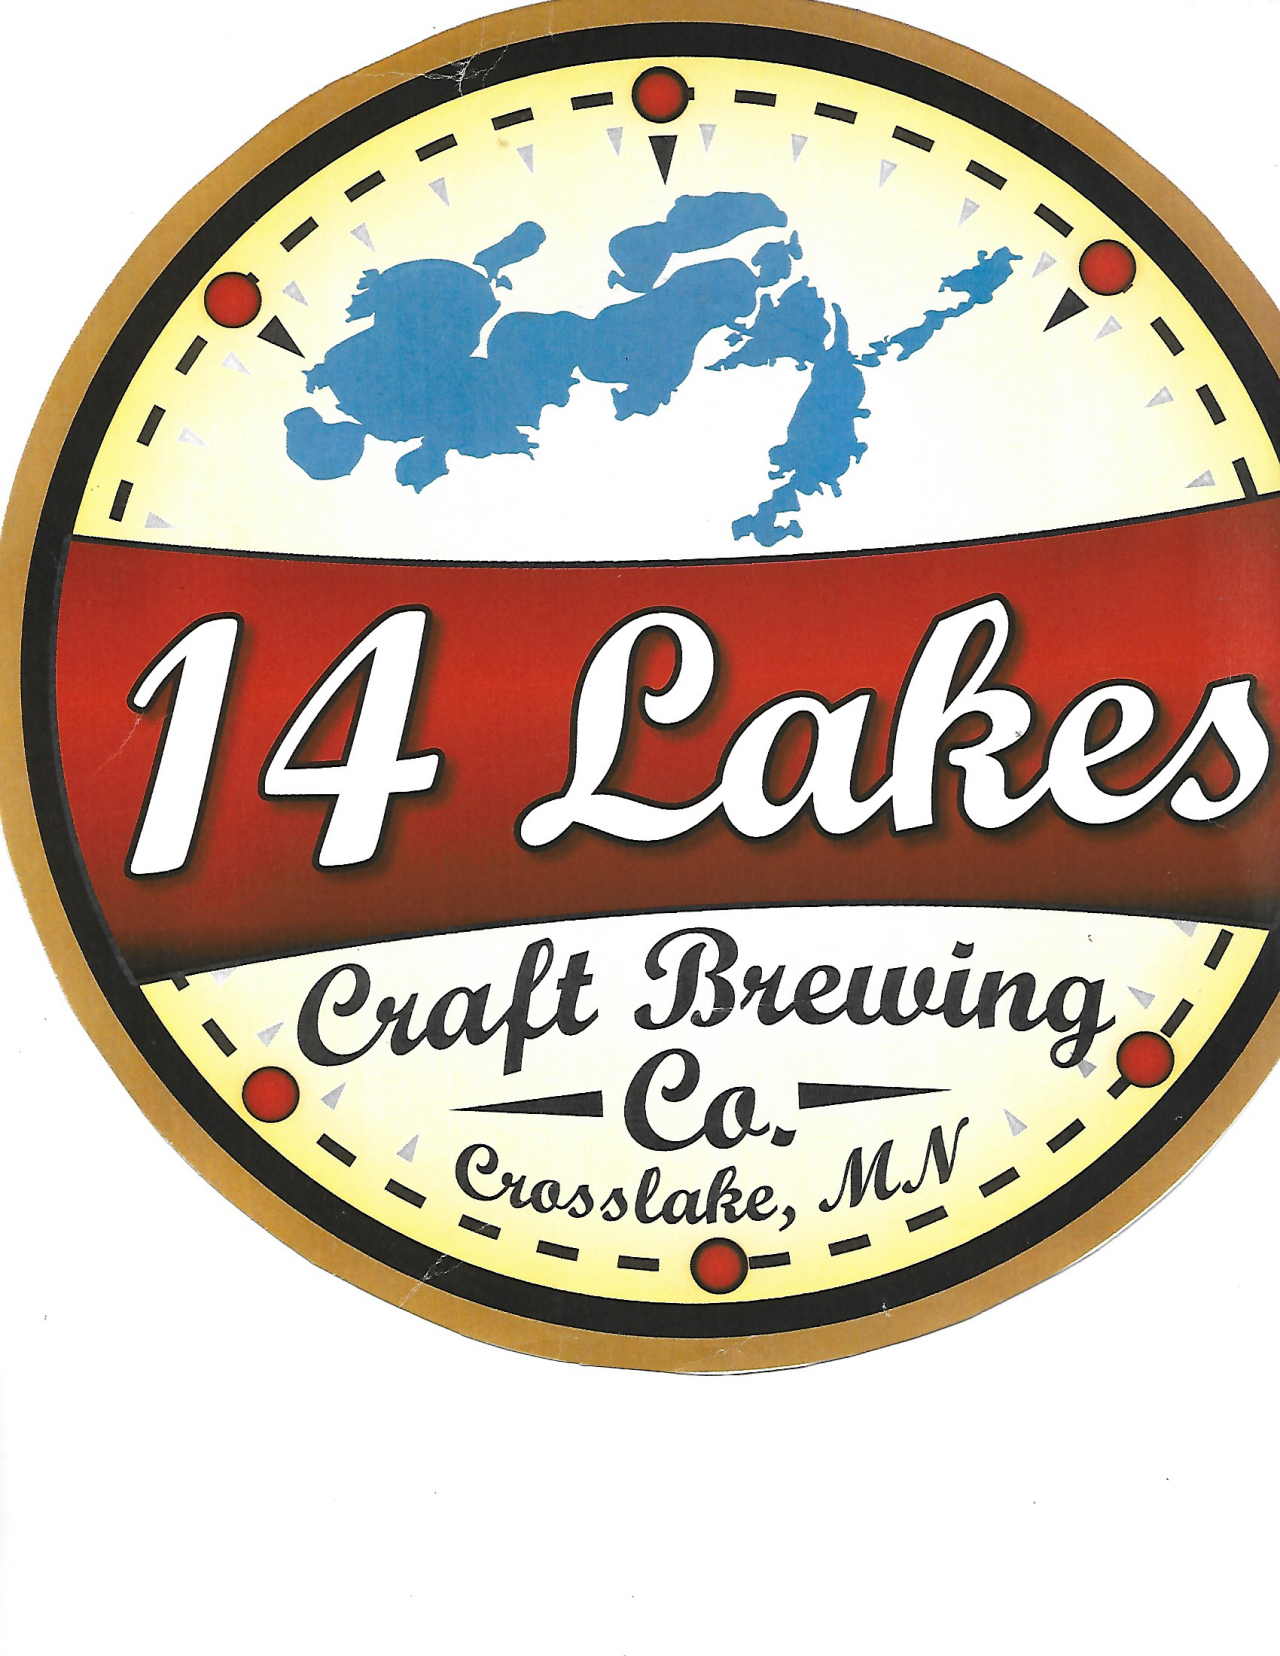 https://www.mncraftbrew.org/wp-content/uploads/2021/09/14-Lakes-1280x1656.png